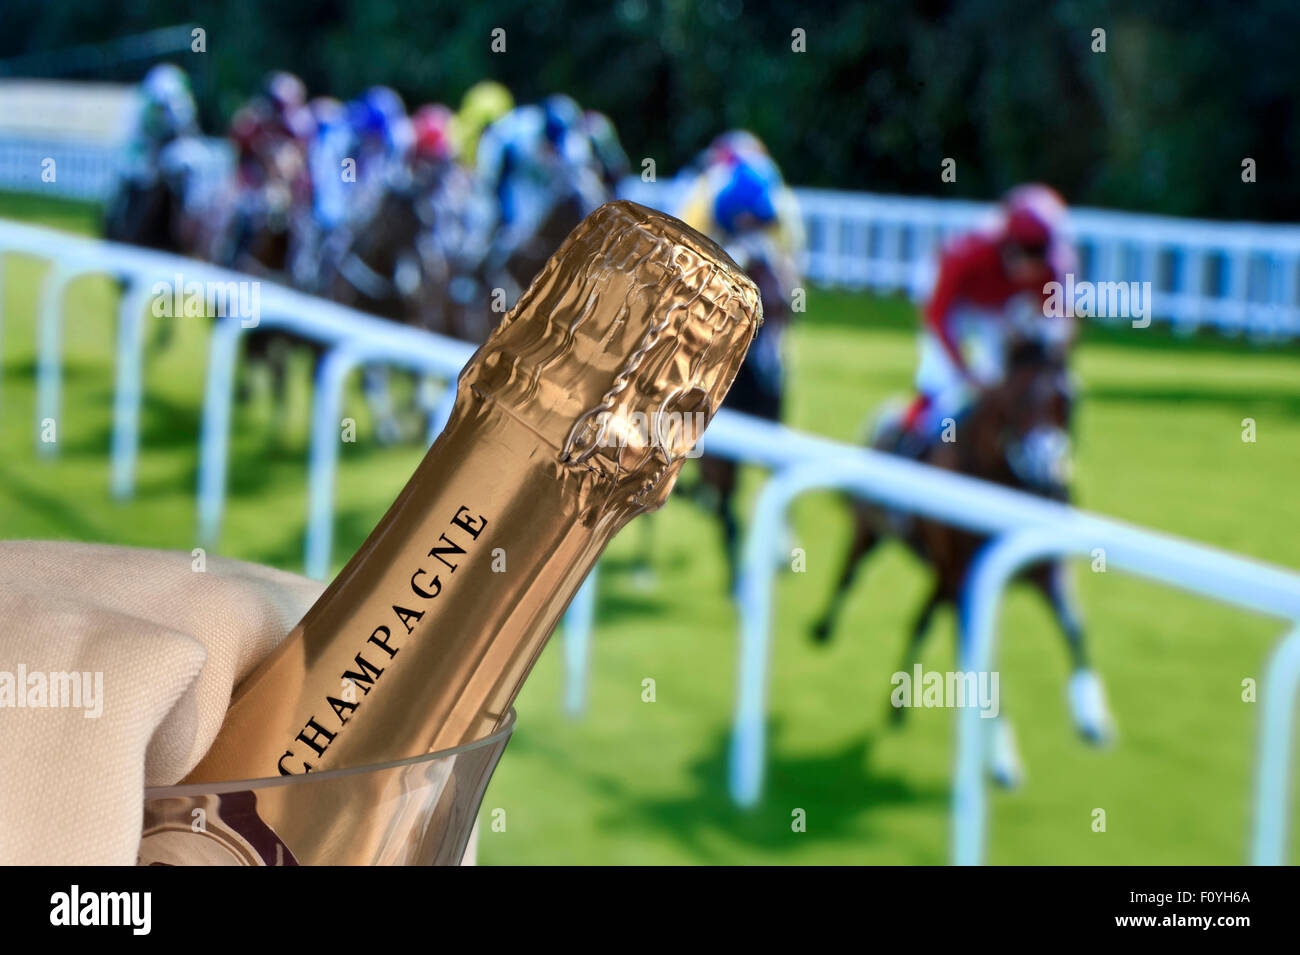 CHAMPAGNE HORSE RACES ASCOT RACING Luxury Champagne in ice bucket with Ladies Day Royal Ascot horse racing in background Ascot Berkshire UK Stock Photo